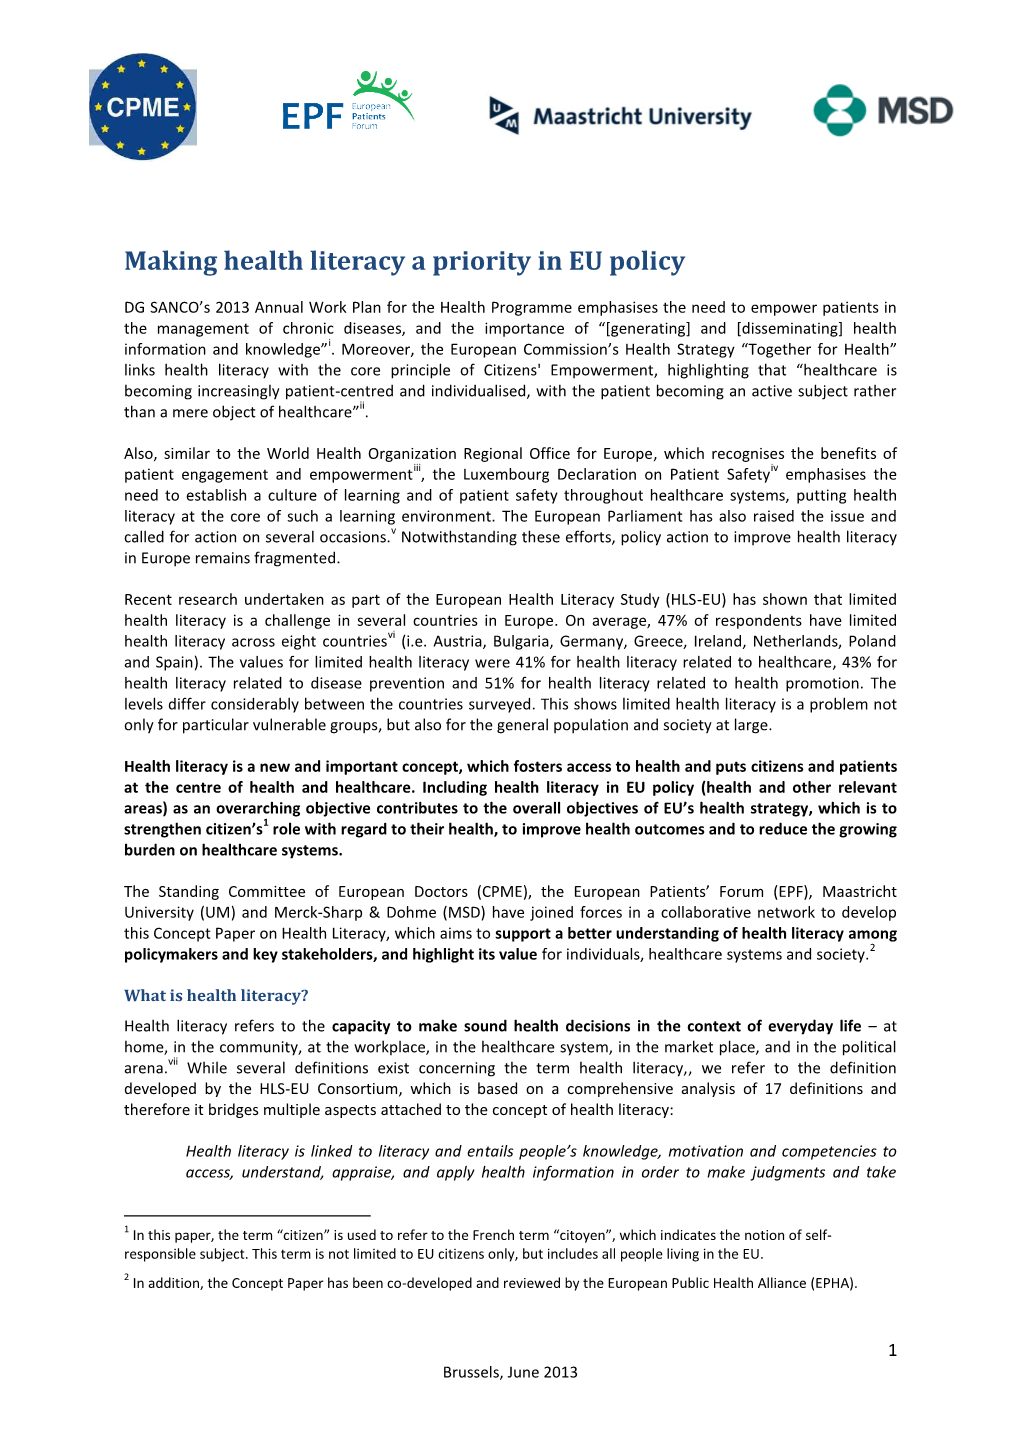 Making Health Literacy a Priority in EU Policy